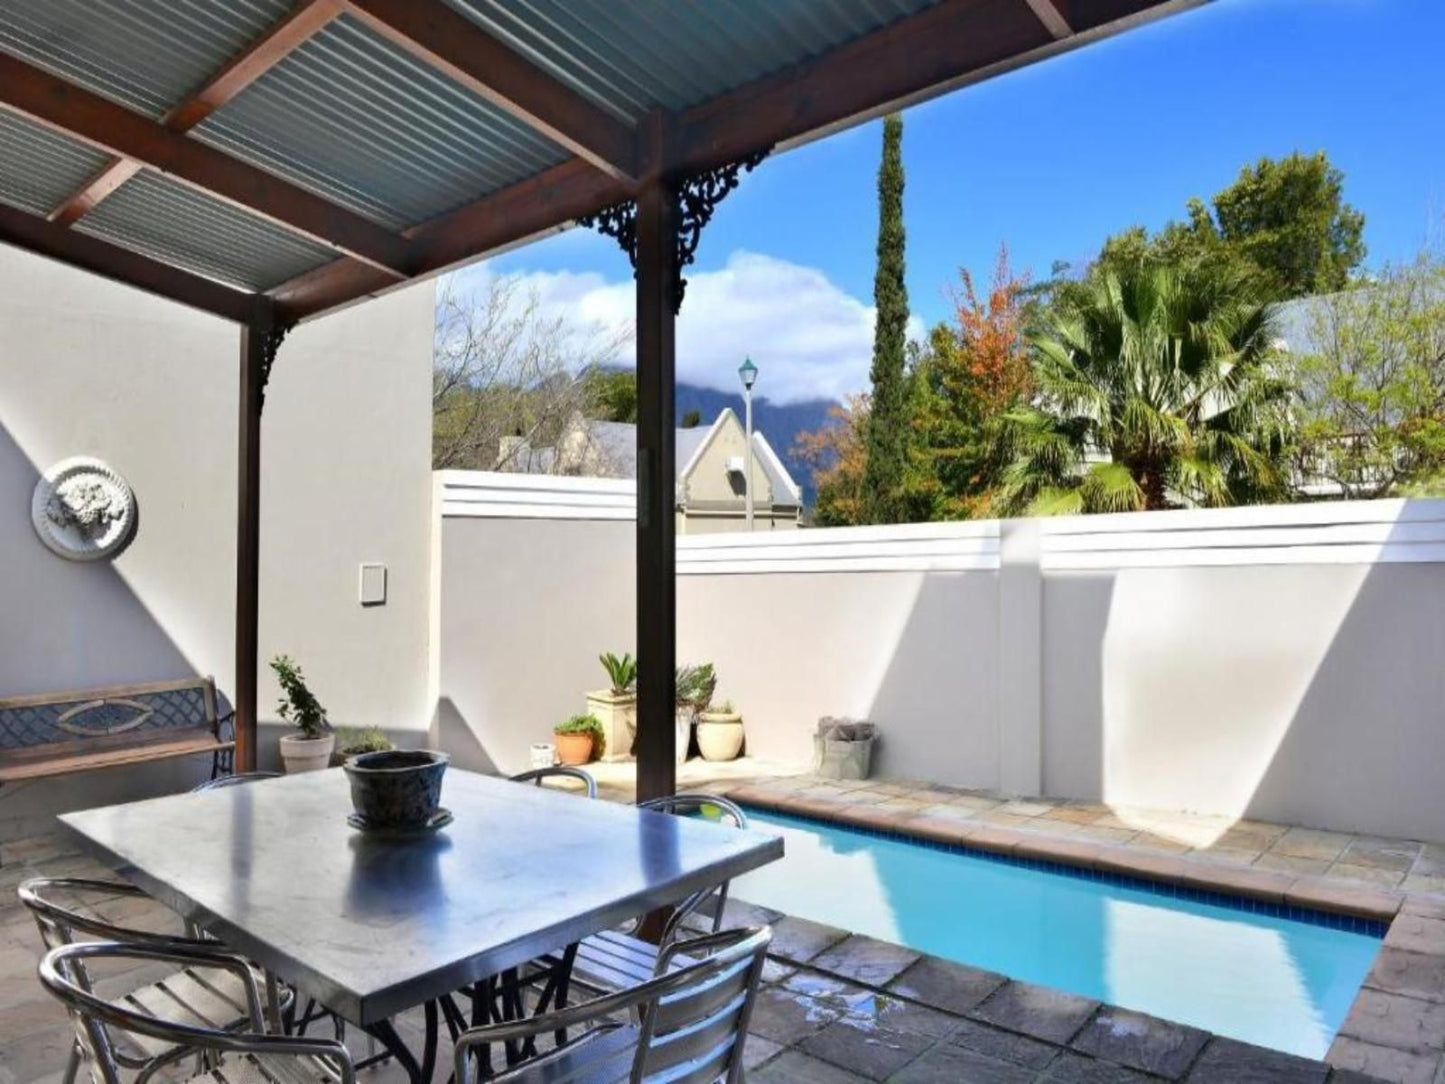 La Gratitude Guest House Franschhoek Western Cape South Africa House, Building, Architecture, Swimming Pool